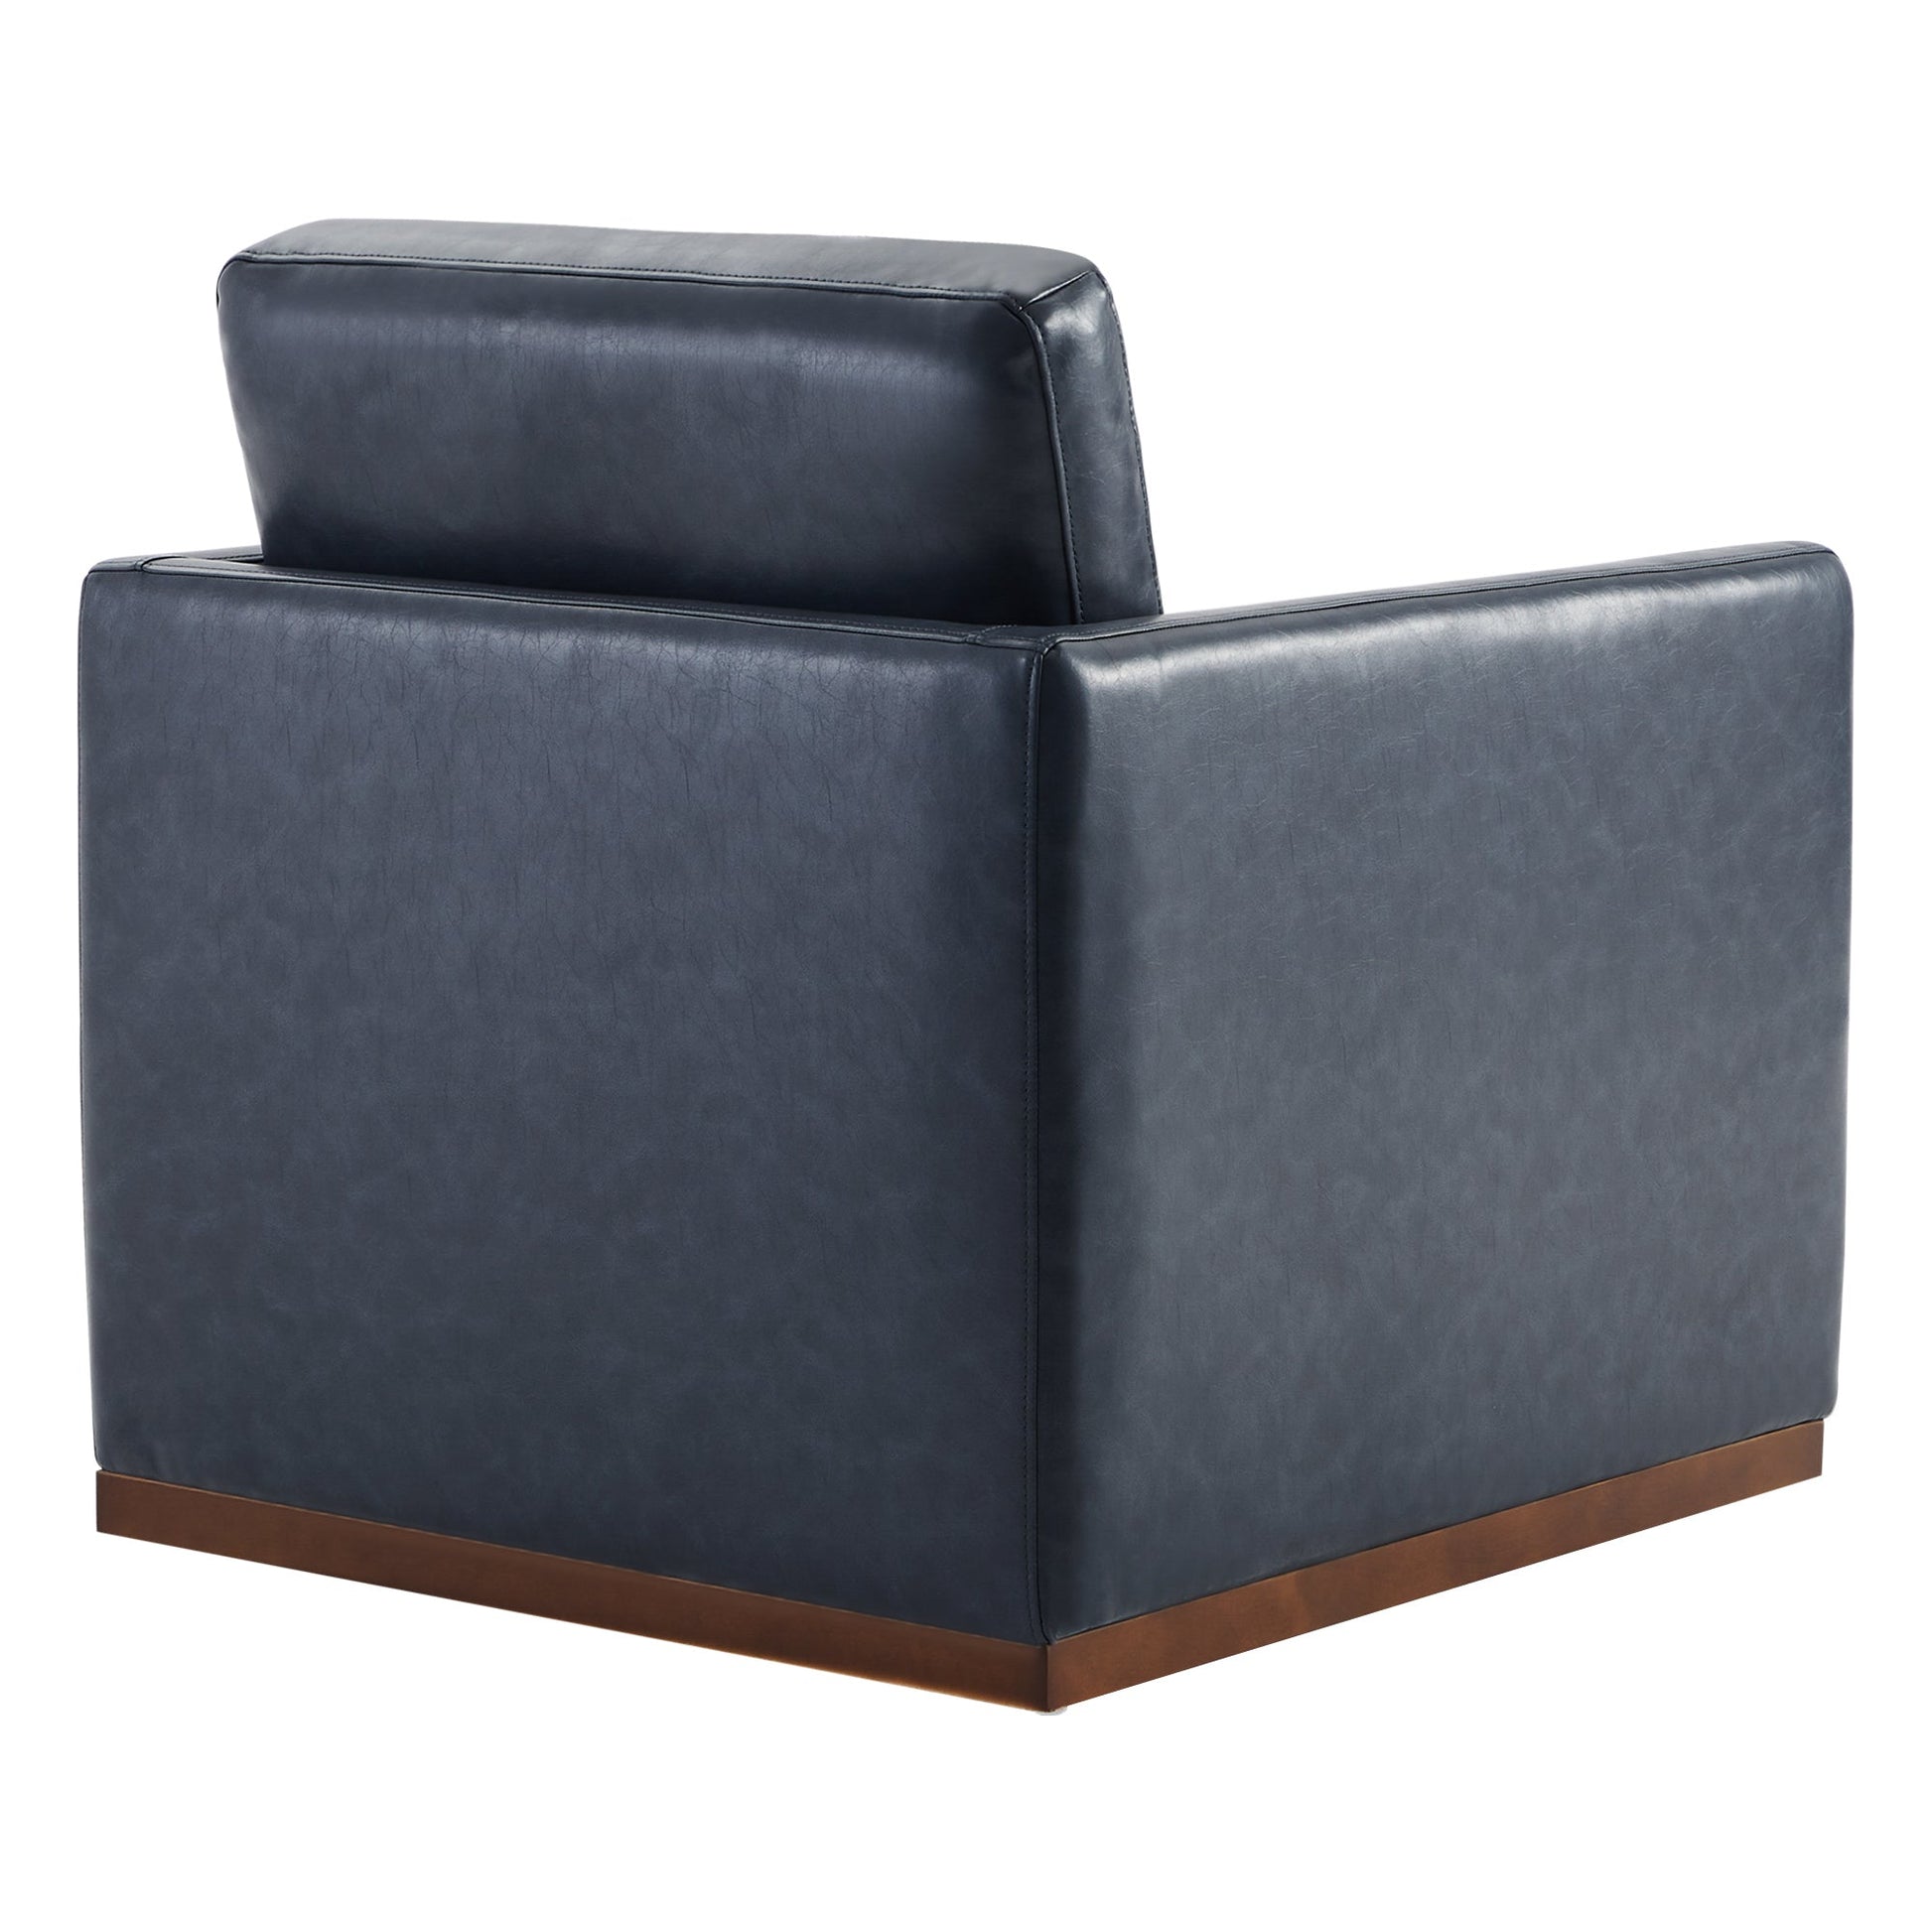 CHITA LIVING-Henry Swivel Accent Chair-Accent Chair-Faux Leather-Navy Blue-